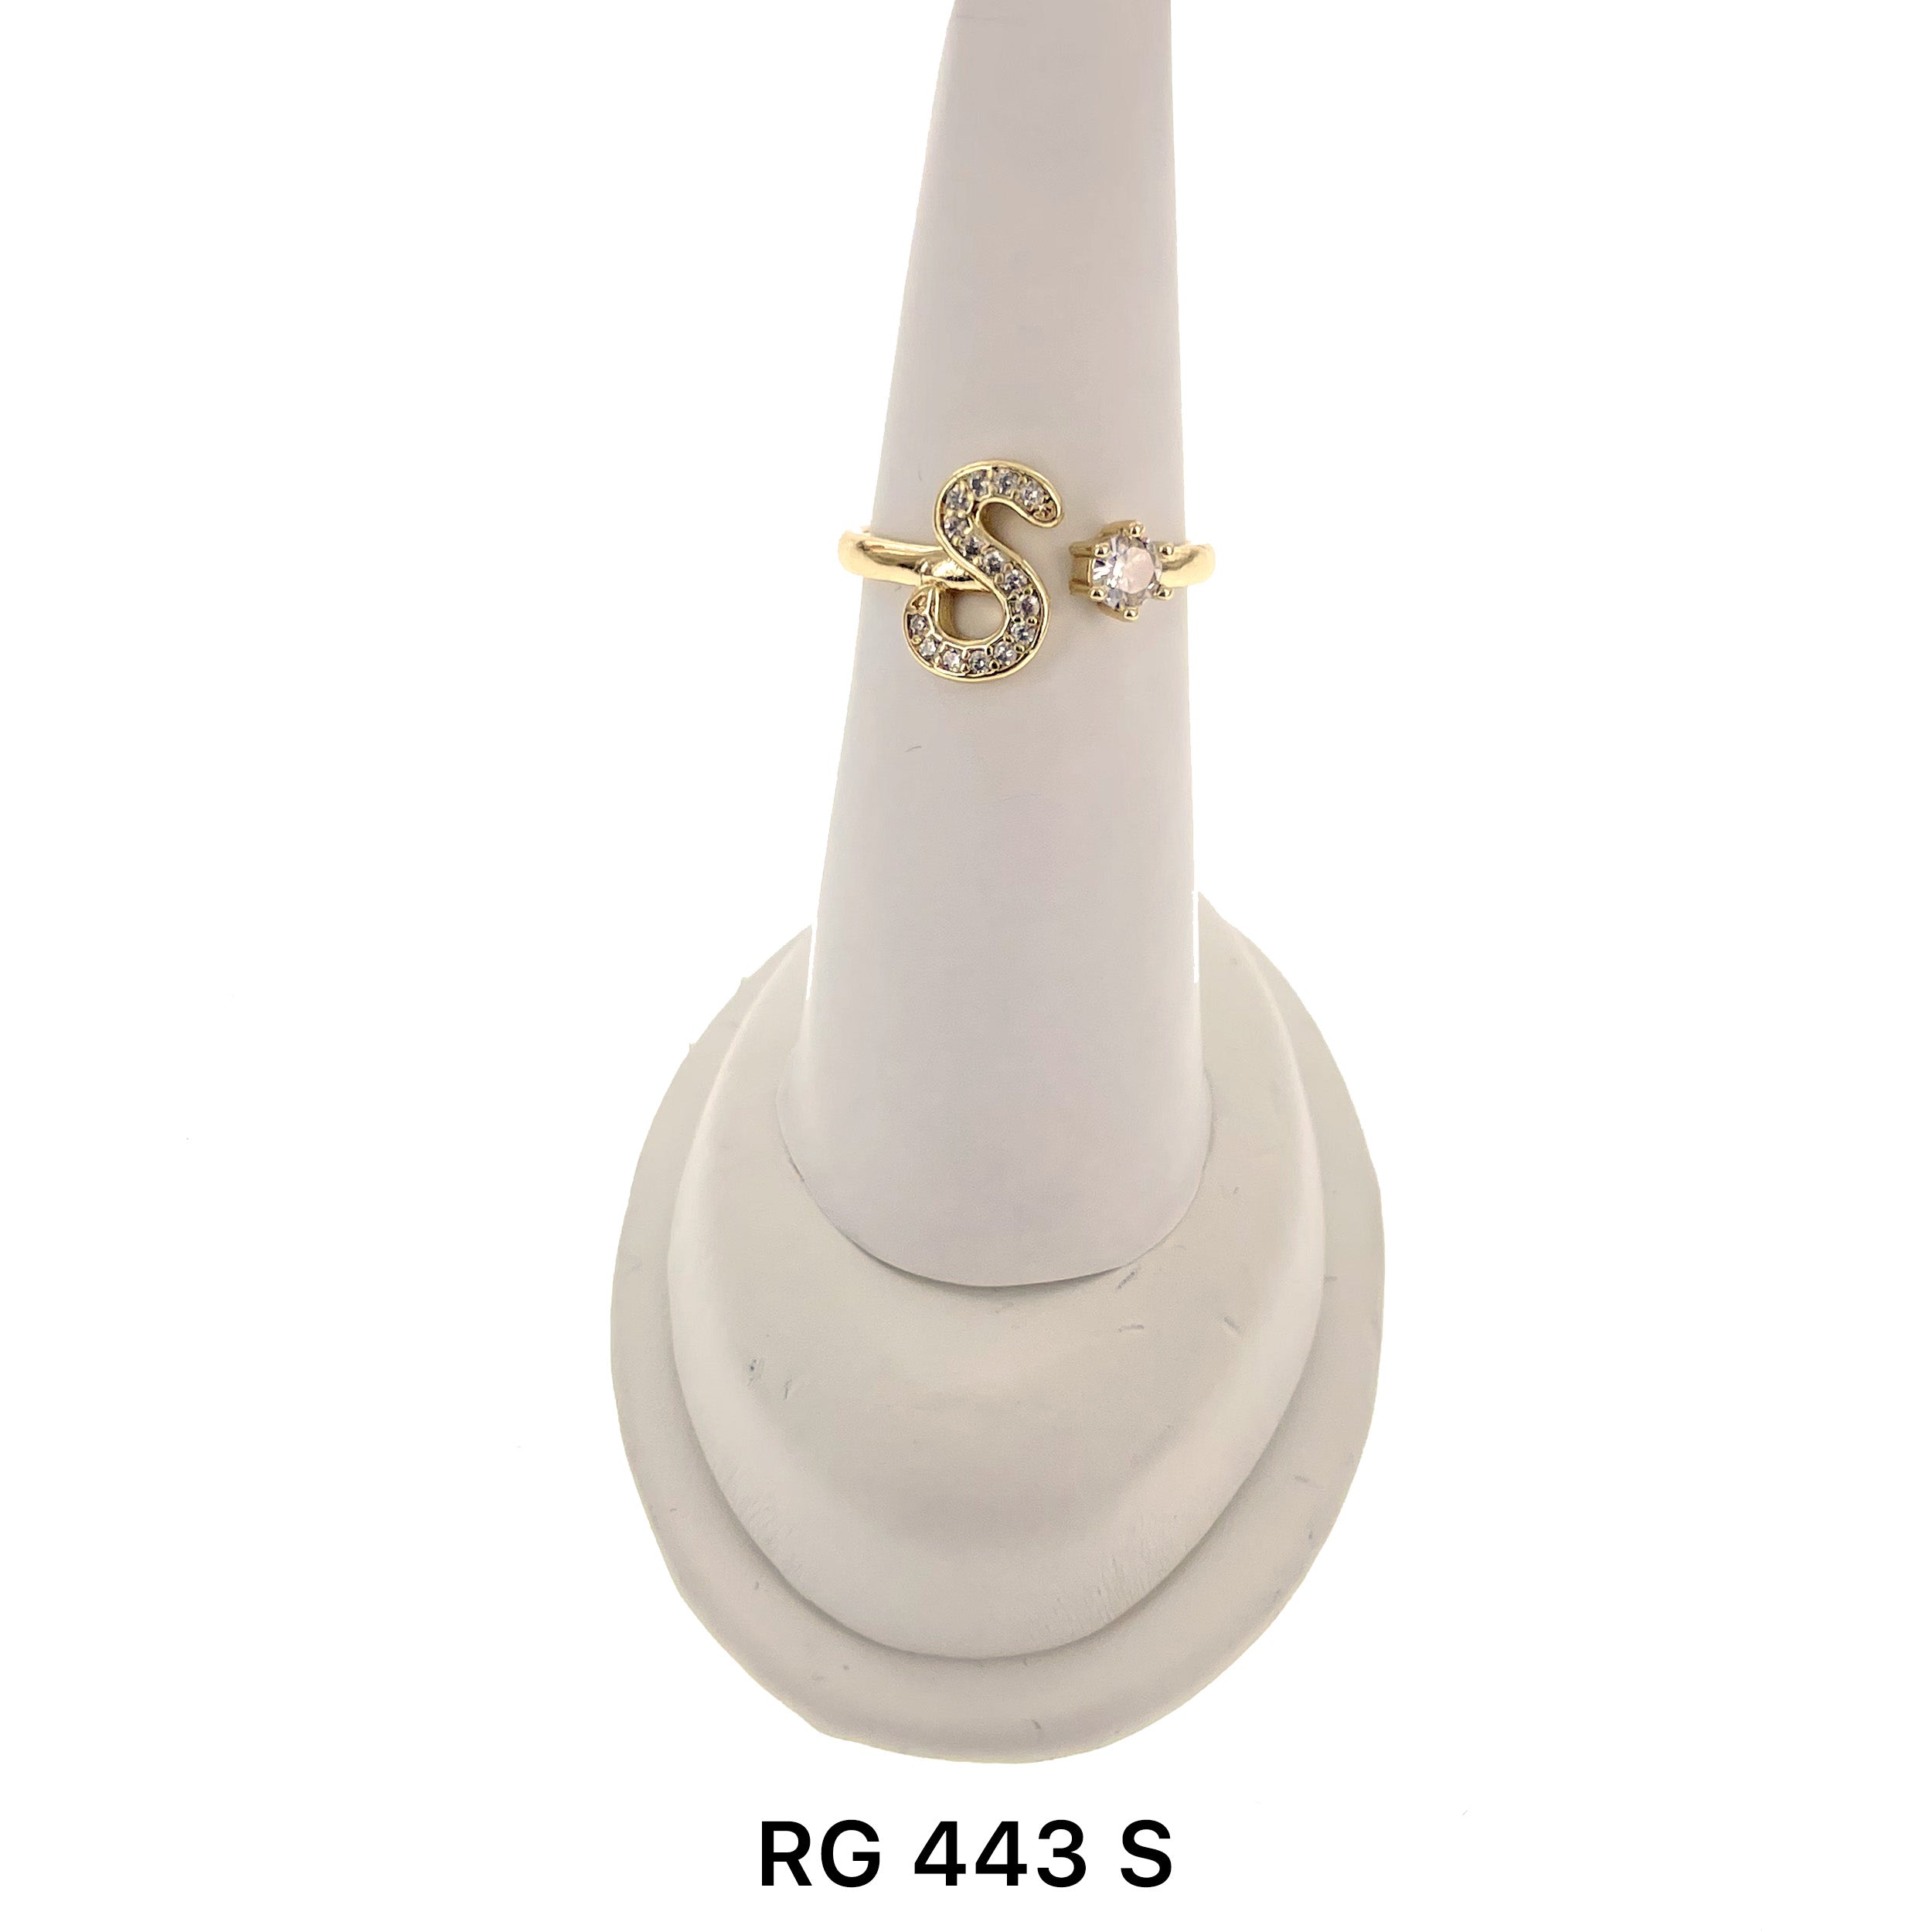 Initial Adjustable Ring RG 443 S